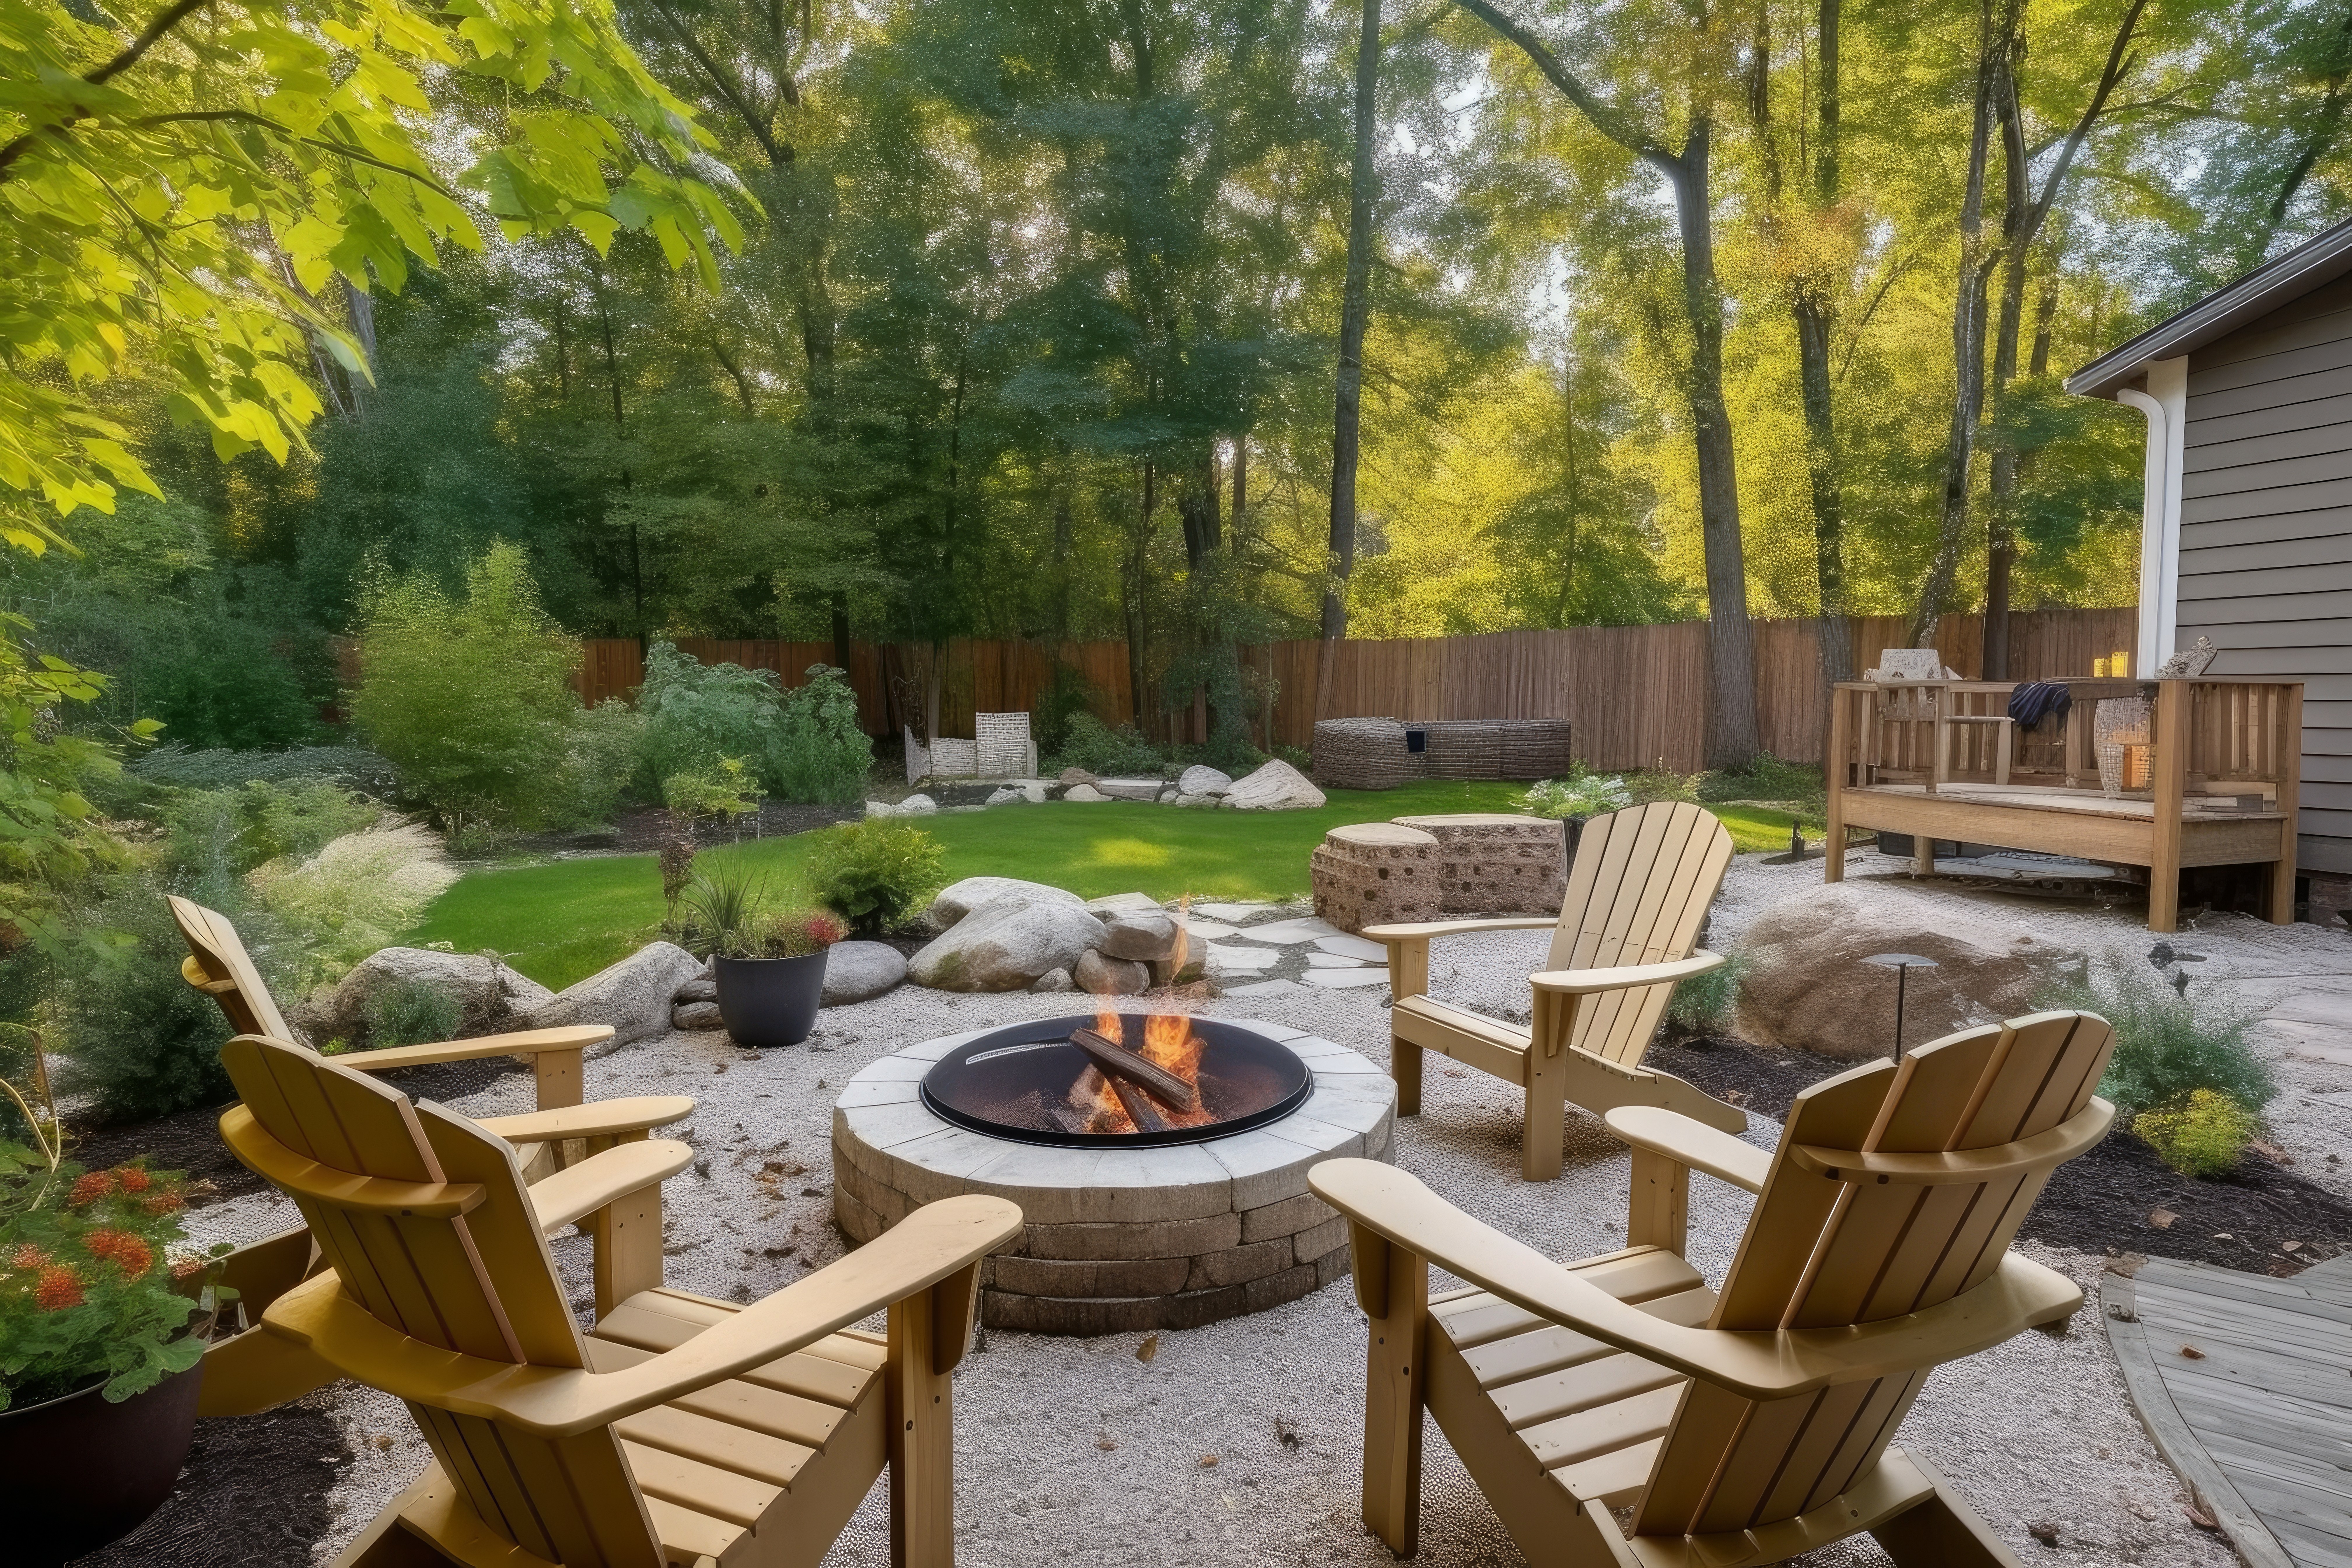 A beautifully designed patio with outdoor furniture, indicating the quality of Praiano Home Improvements' outdoor living space design and construction services.